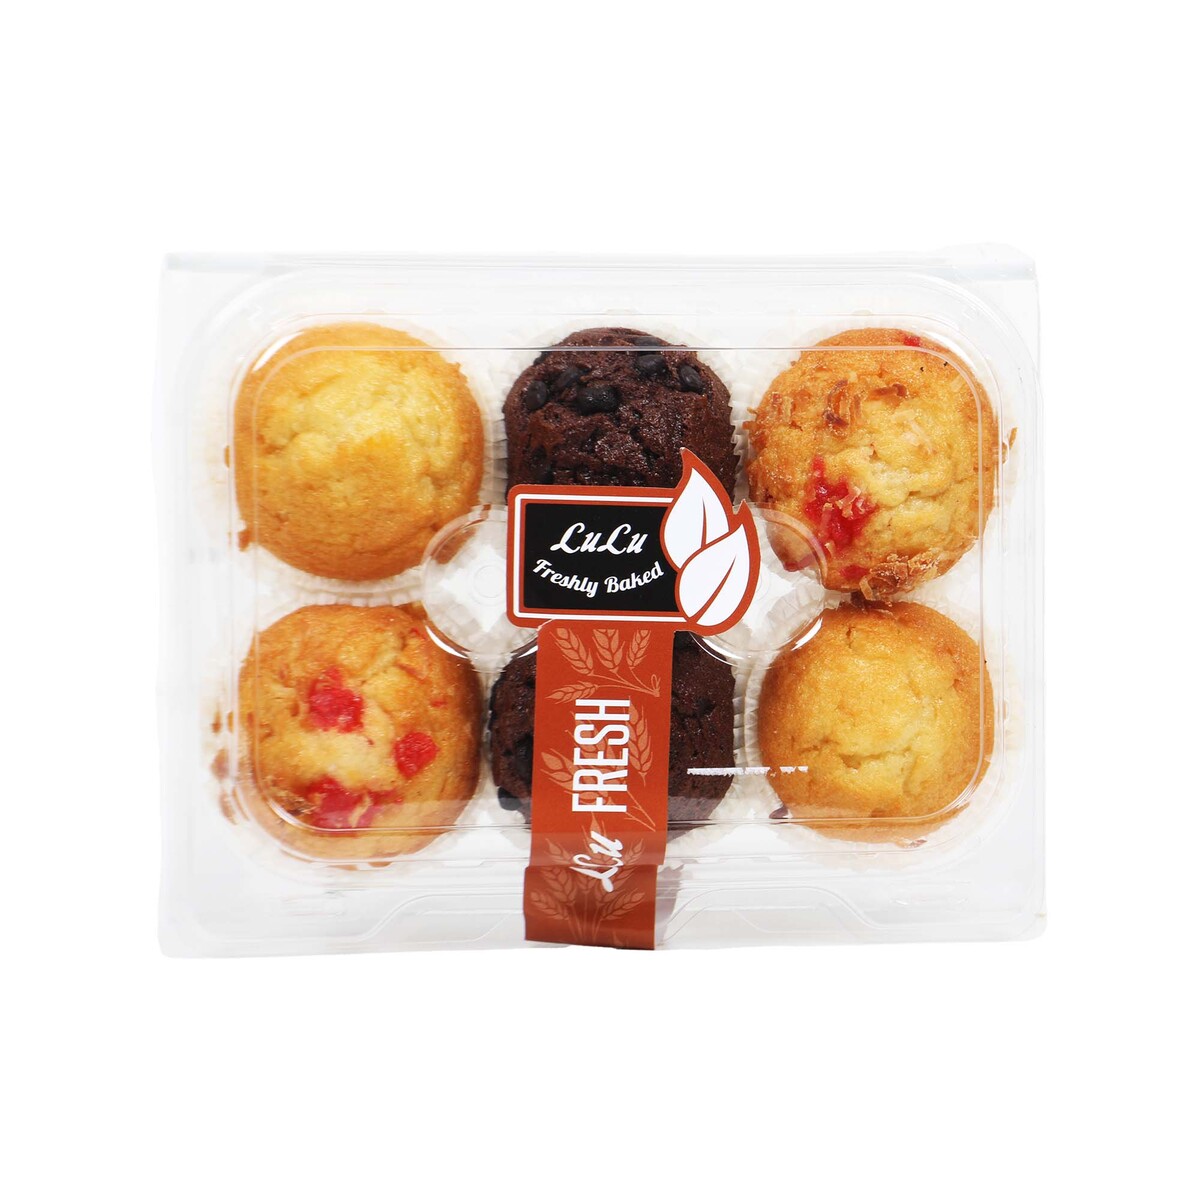 Muffins Assorted Pack 6pcs